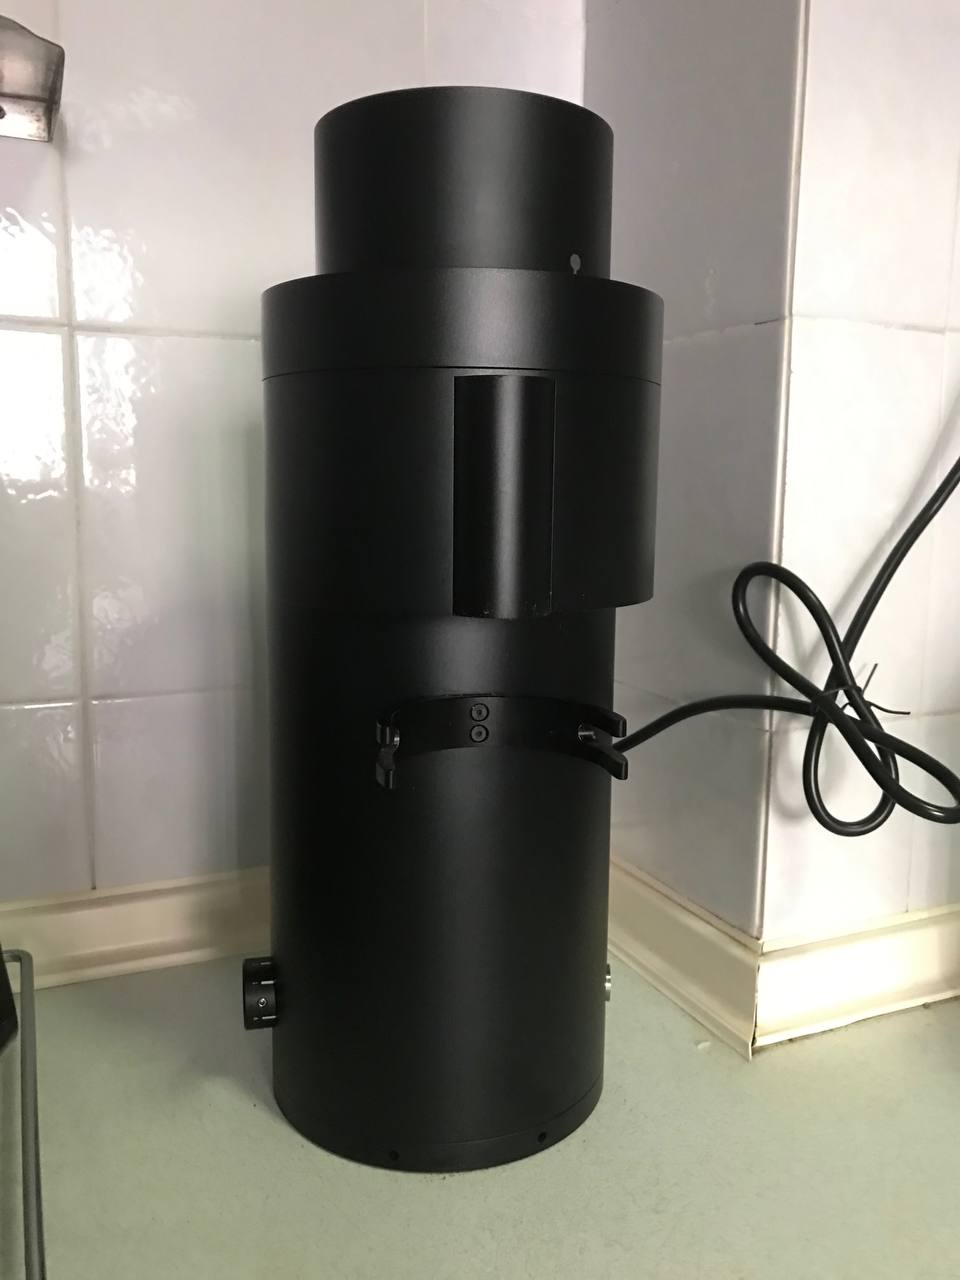 The P100 anodized in black has a cylindrical body with a smaller bean intake funnel at the top. Prongs of the integrated portafilter fork protrude from the front, near the exit chute where ground coffee is dispensed.